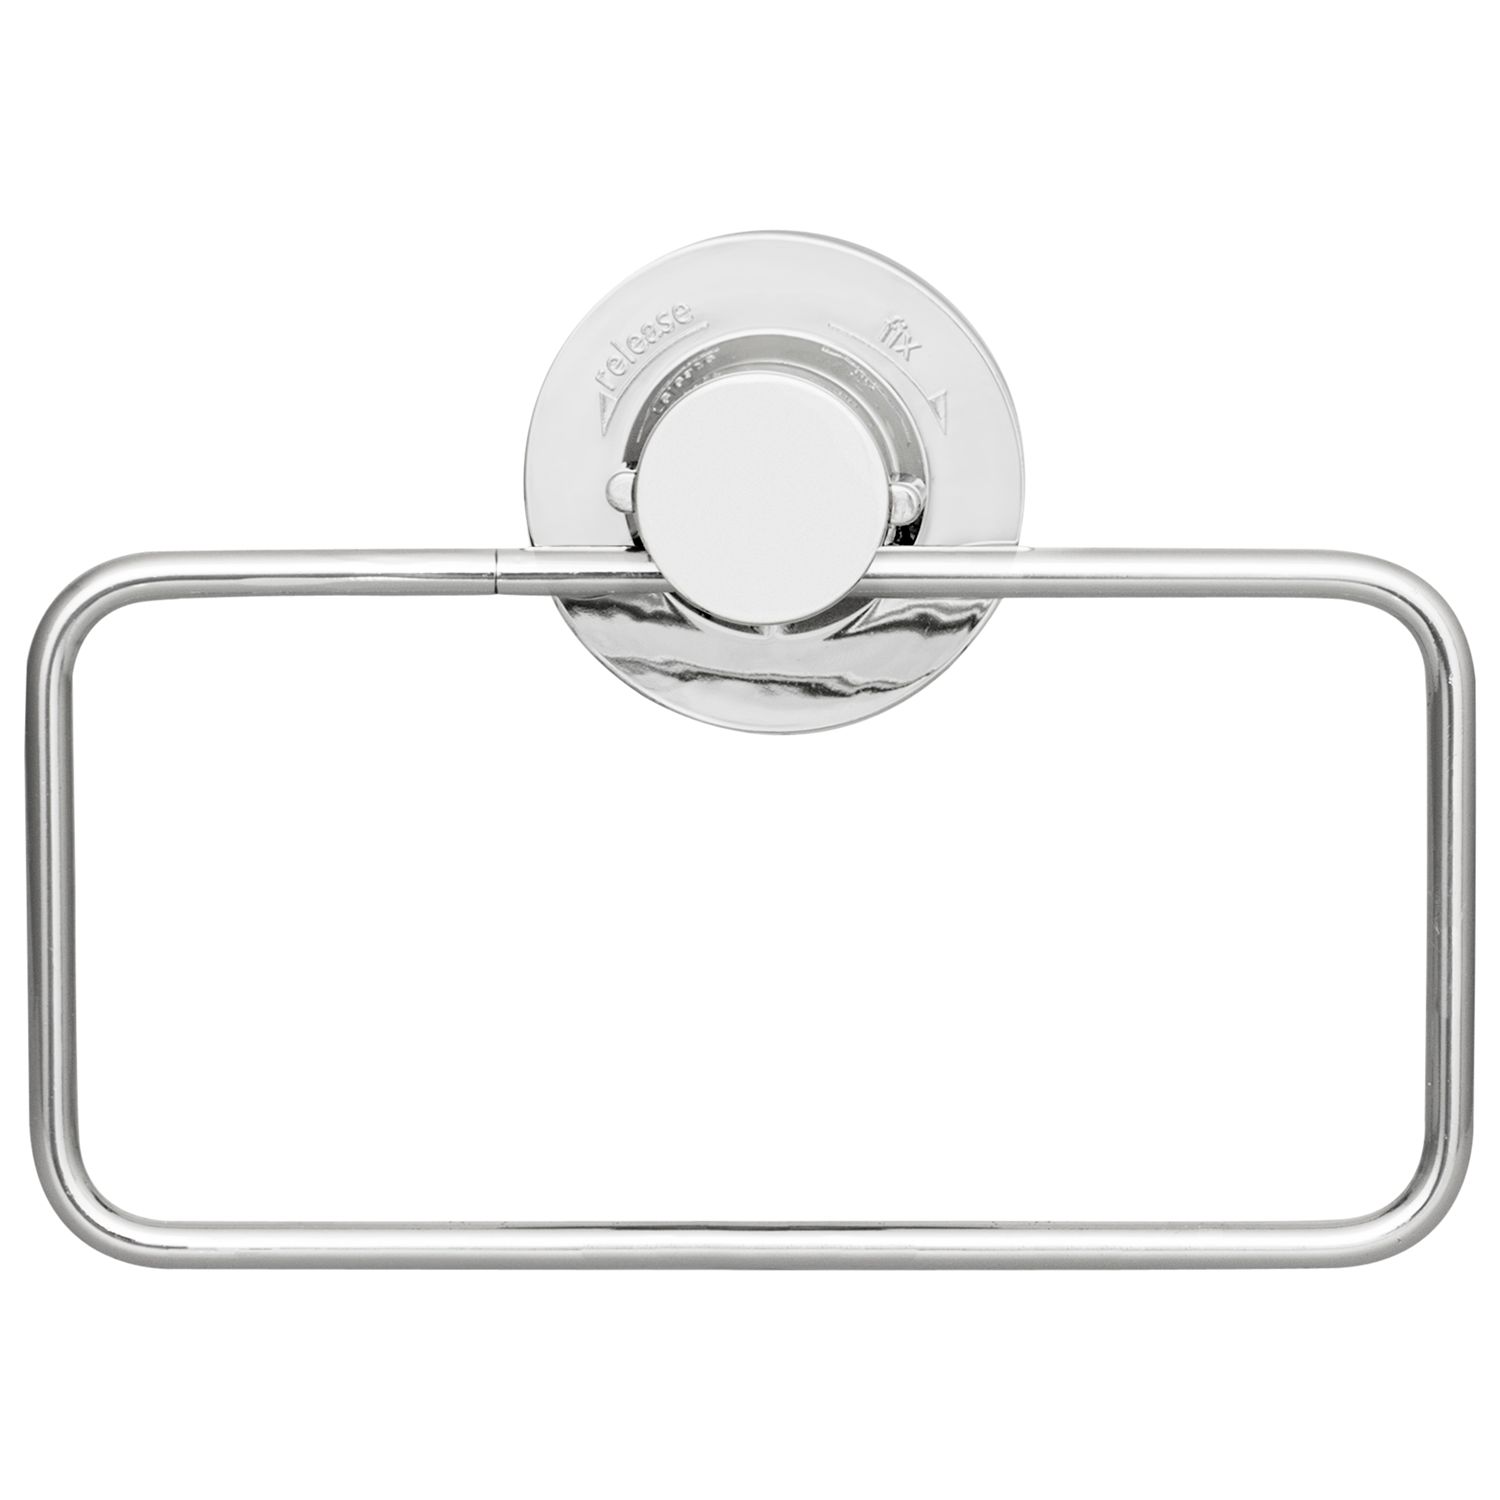 Bliss Lock N Roll Suction Towel Ring